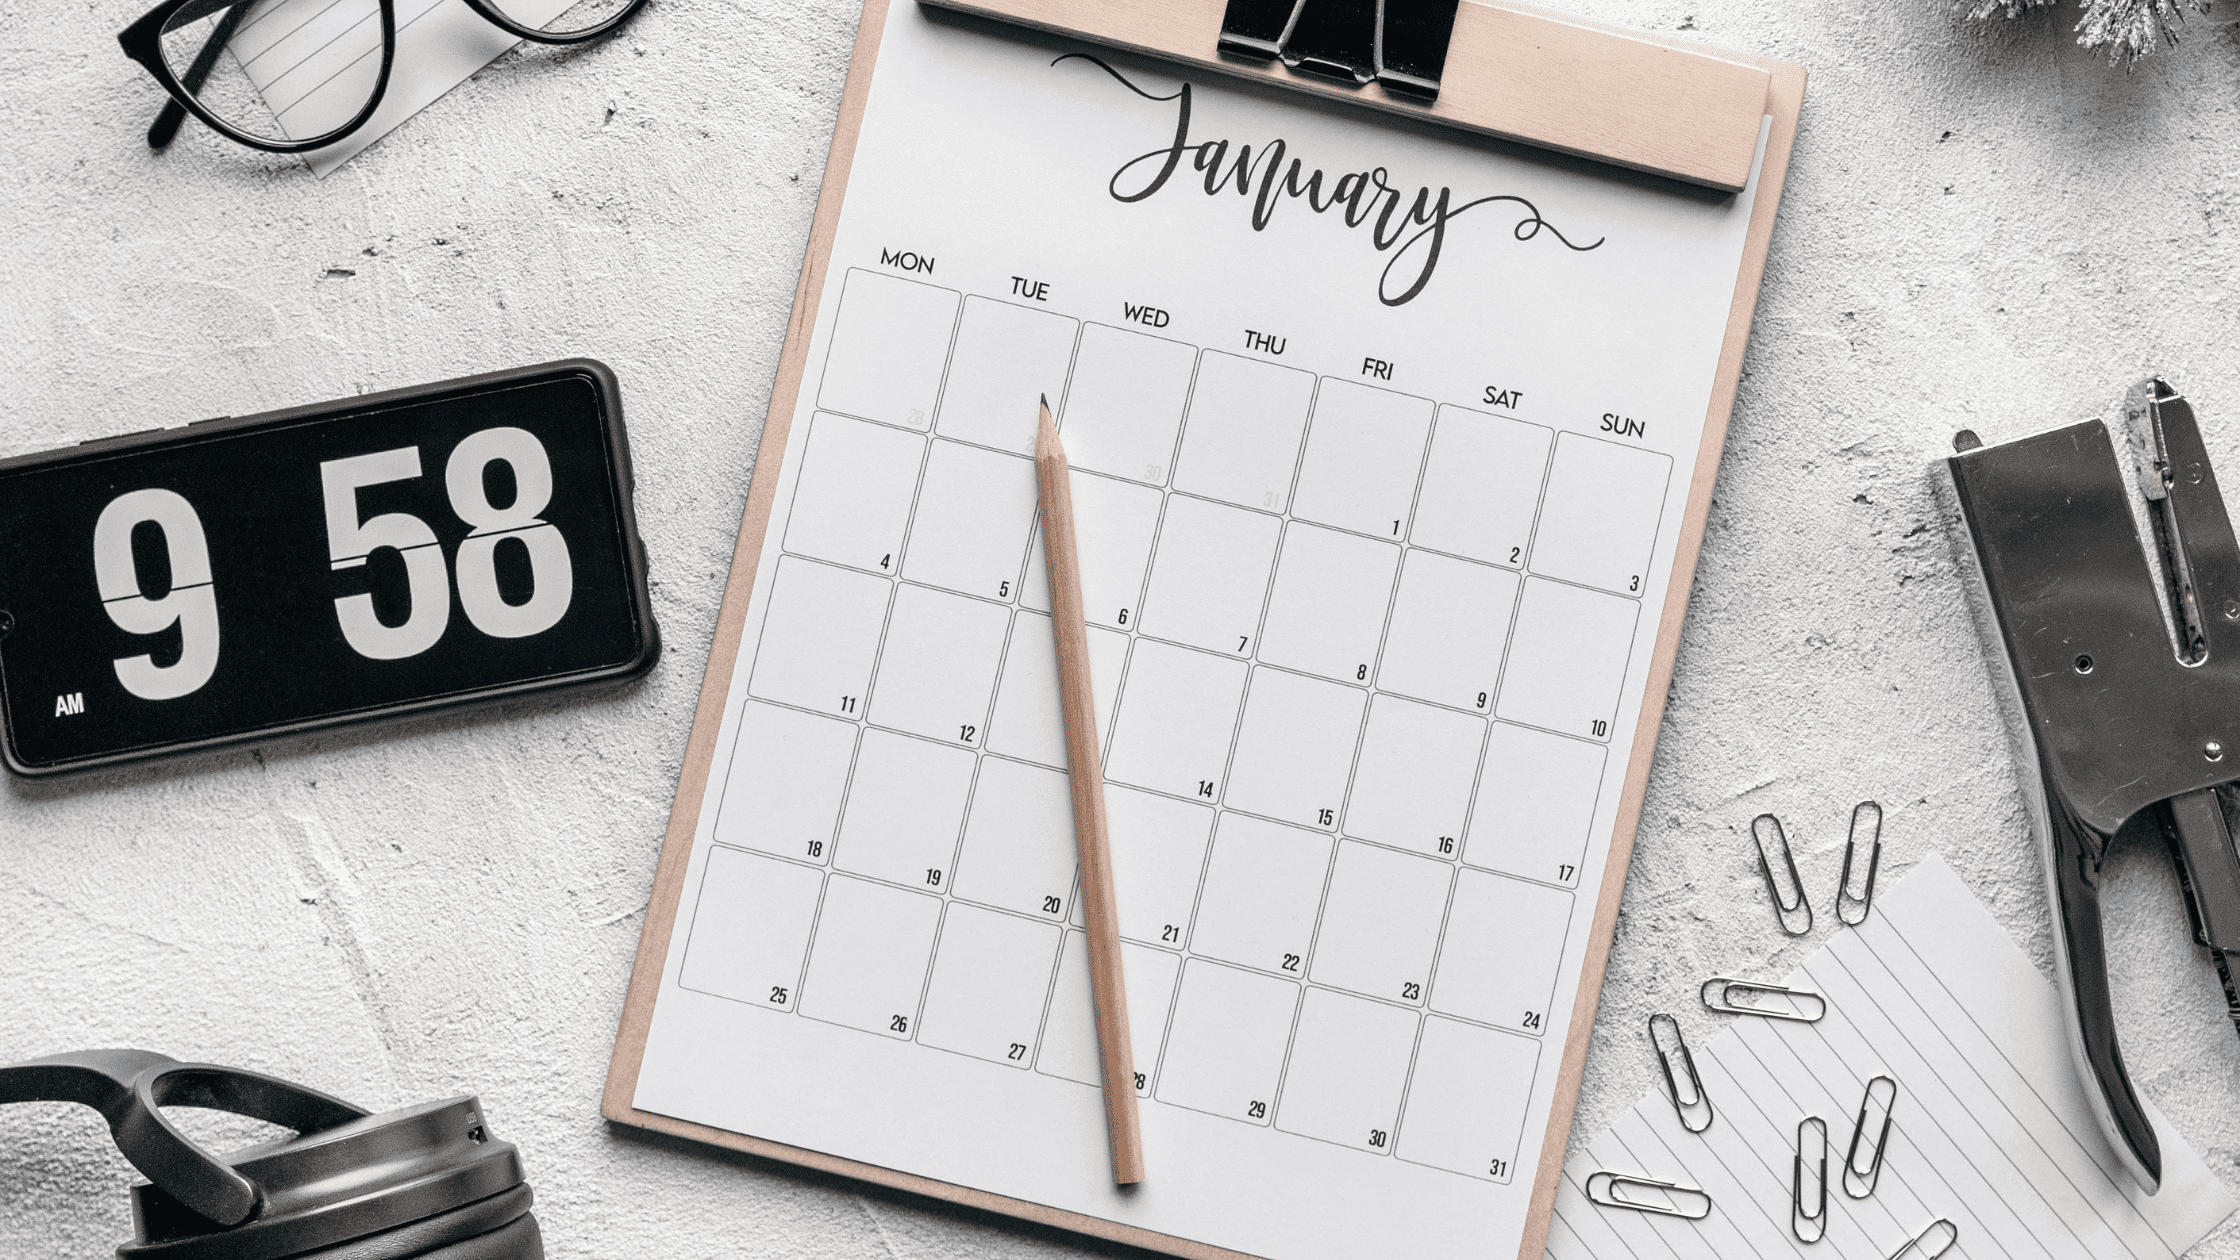 Graphical image of clipboard with January calendar, pencil on top of the calendar. Phone with clock to the left, various stationary items to the left on white background.